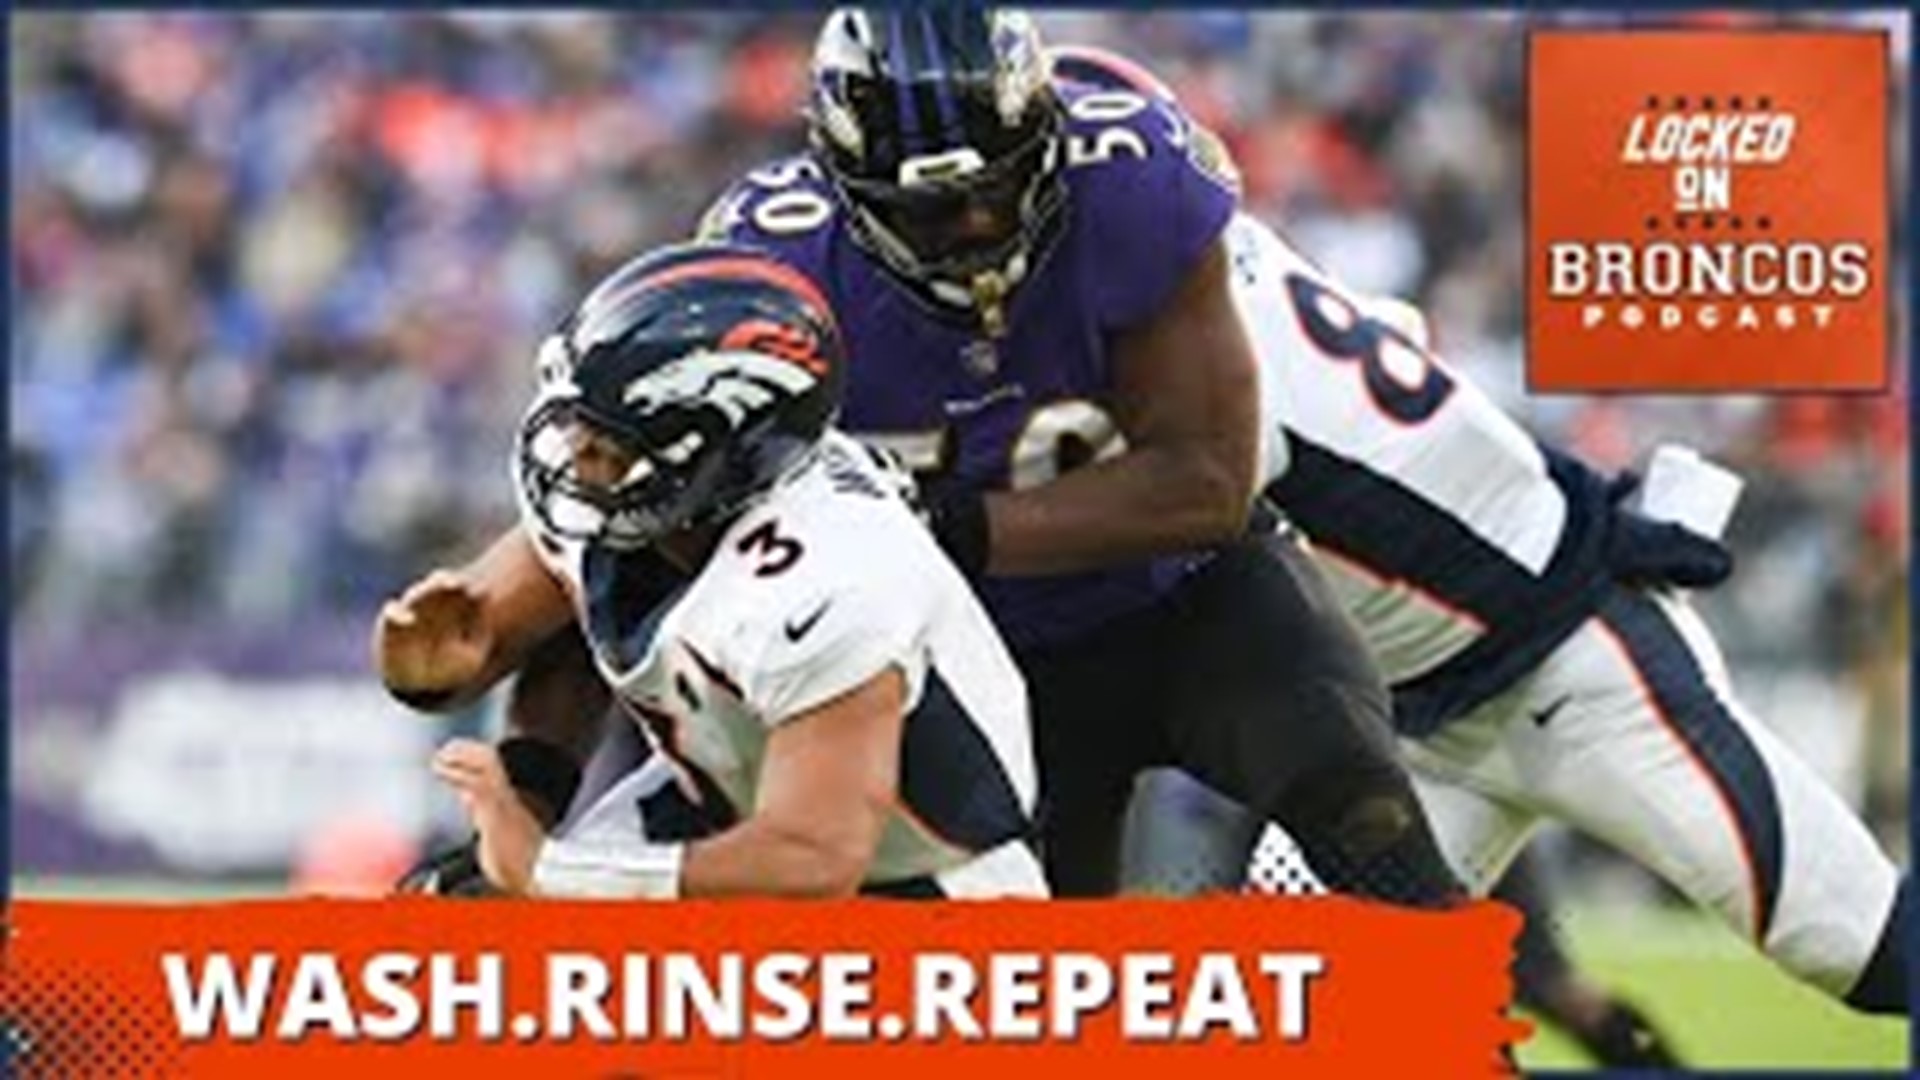 The Denver Broncos collapsed late in a loss to the Baltimore Ravens who were without Lamar Jackson on Sunday.